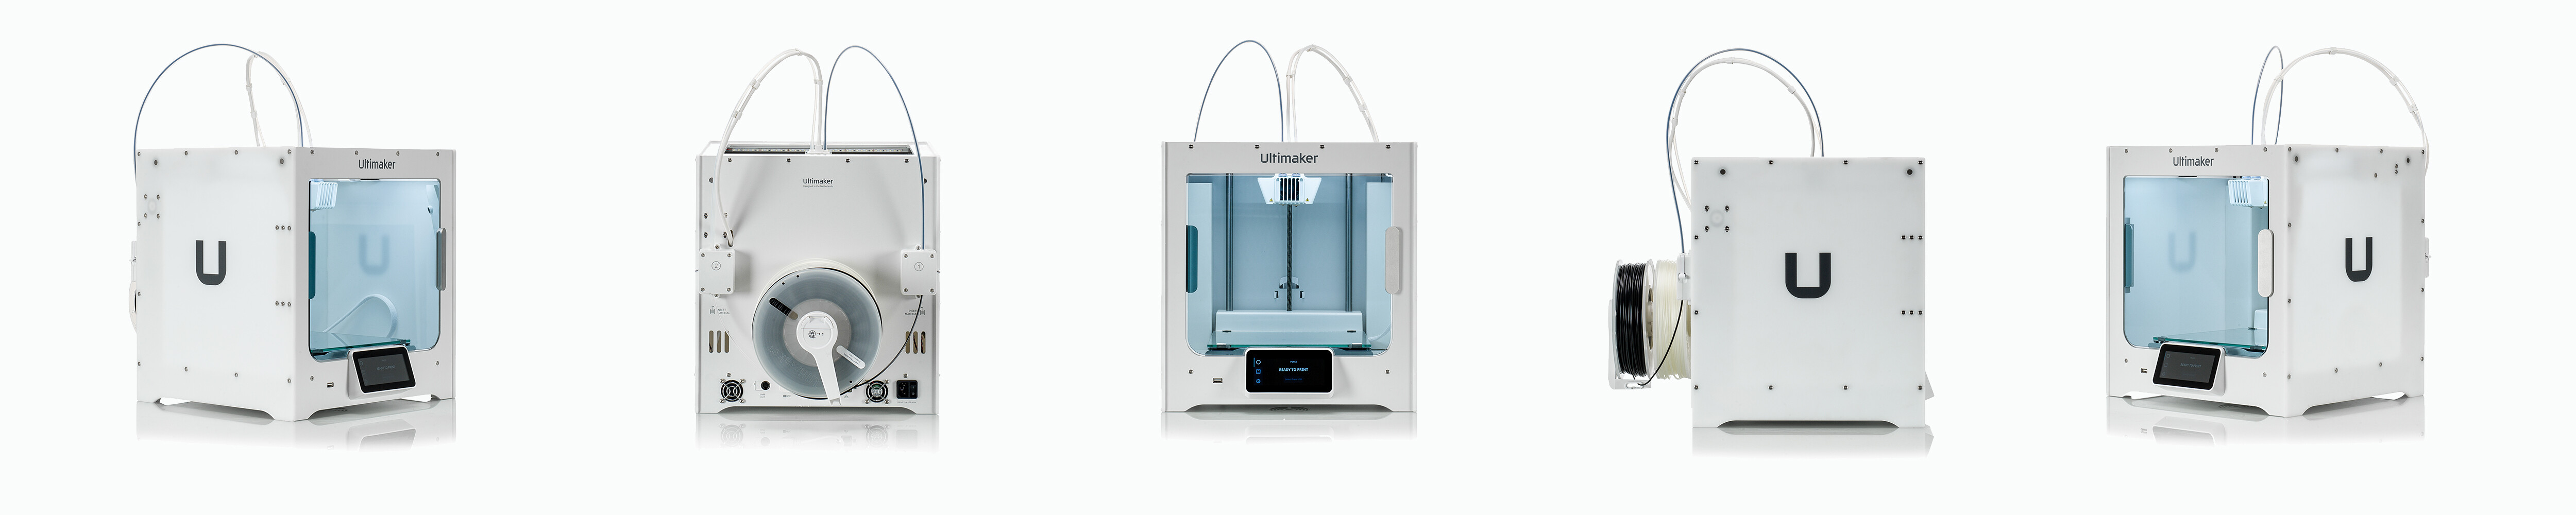 ULTIMAKER S3 MULTI VIEW